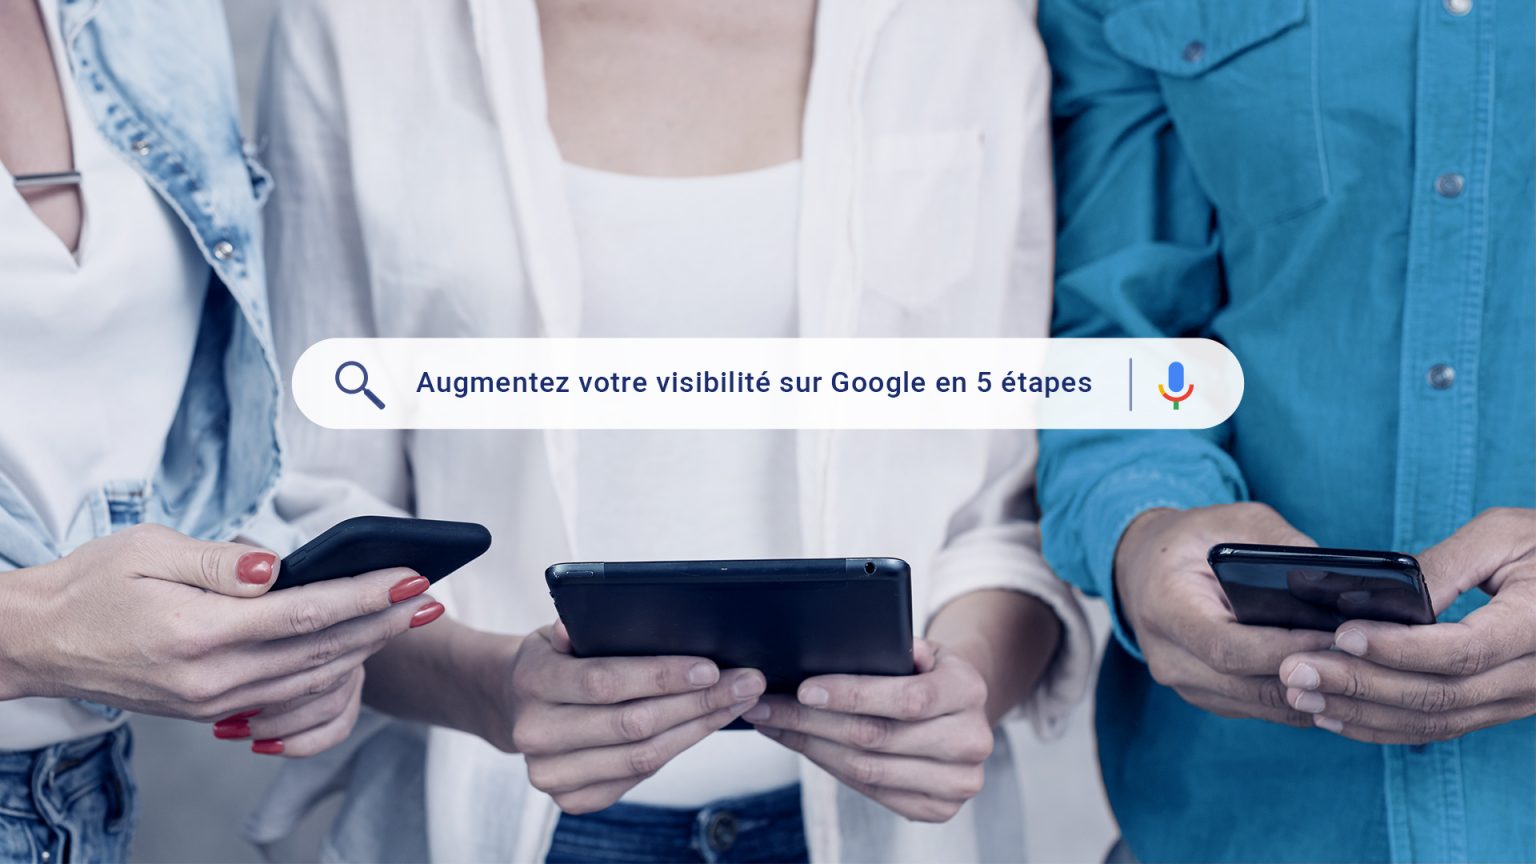 Increase your Google visibility in 5 steps